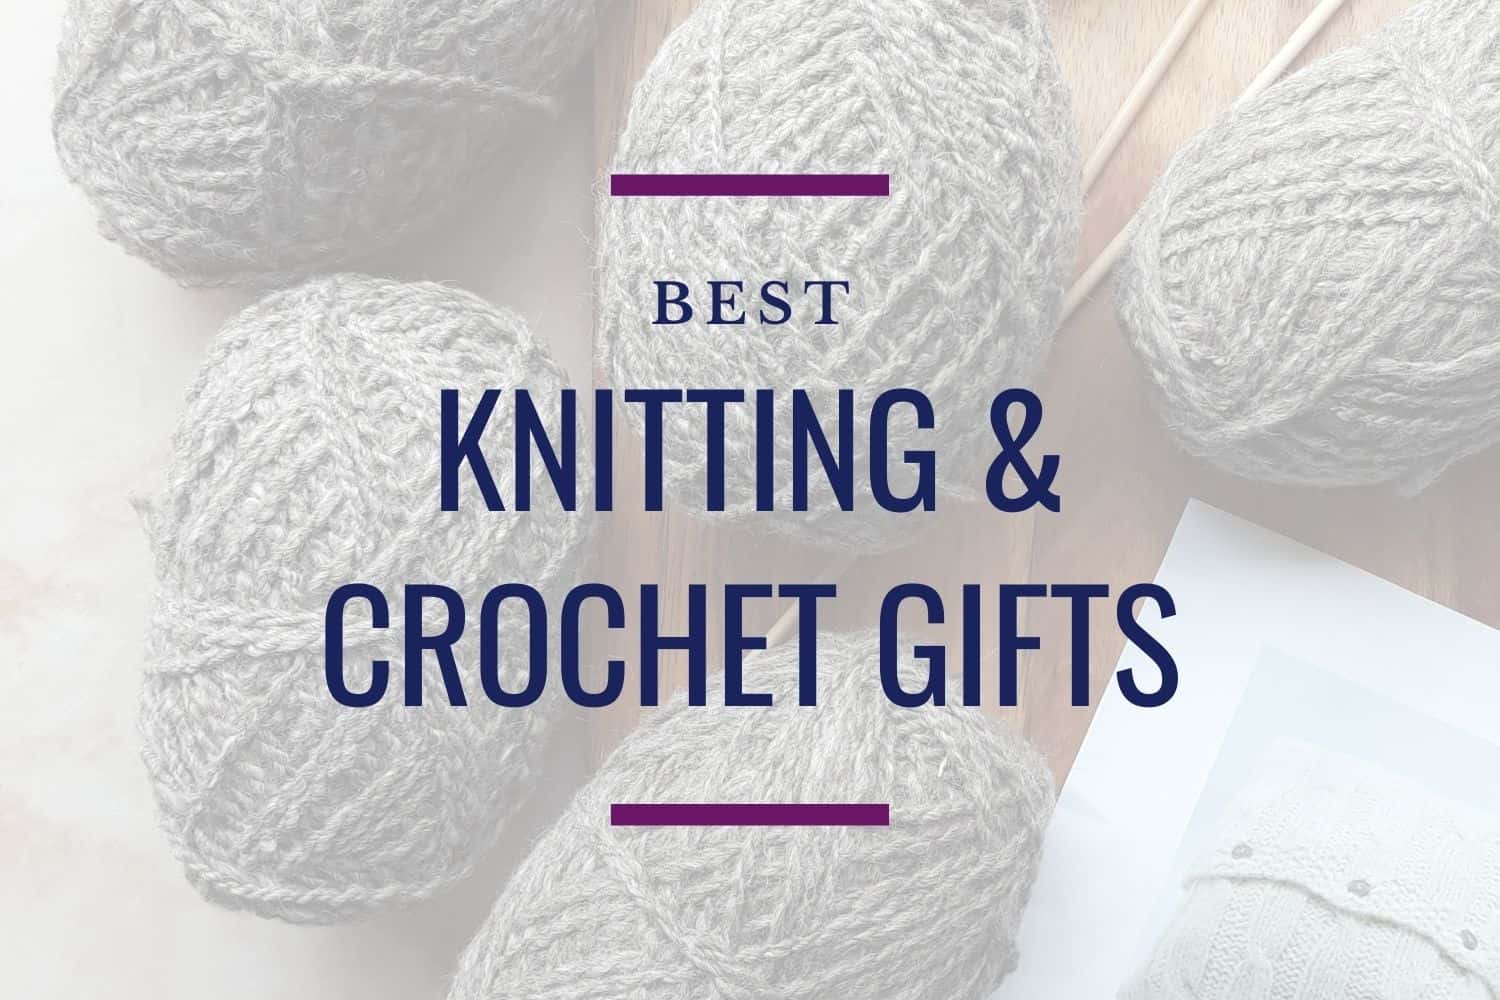 26 Knitting and Crochet Gifts - Best Gift Ideas for Knitters and Crocheters